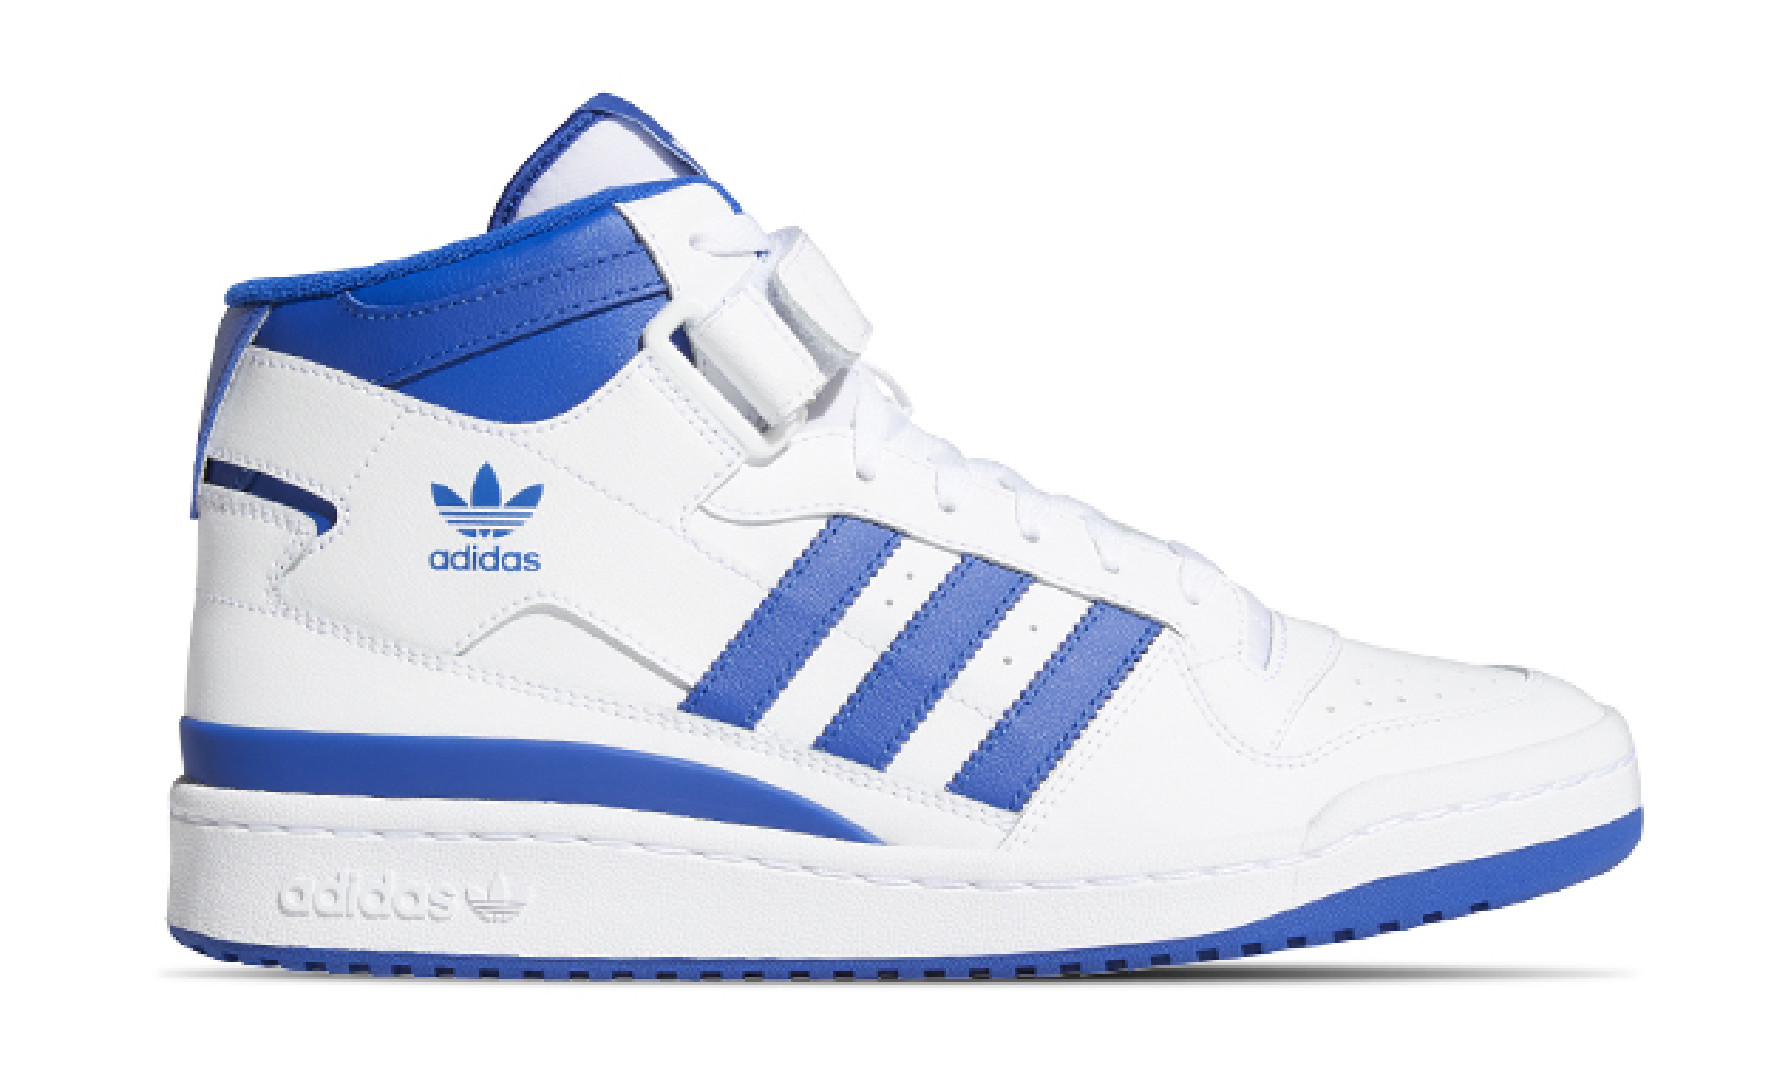 Adidas Forum Mid FY4976 Release Date